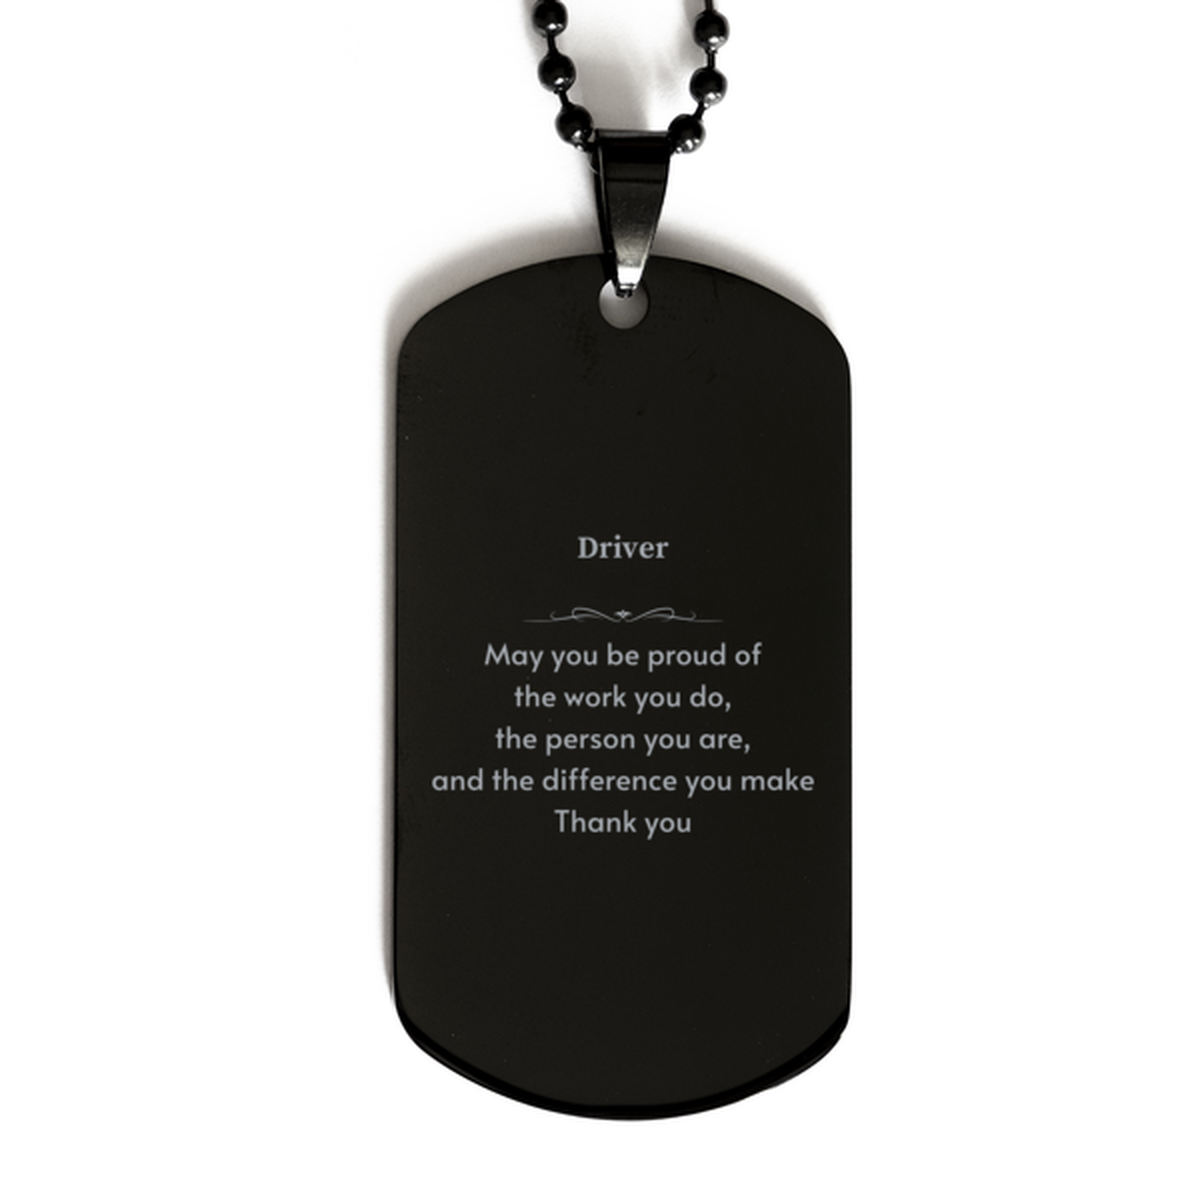 Heartwarming Black Dog Tag Retirement Coworkers Gifts for Driver, Driver May You be proud of the work you do, the person you are Gifts for Boss Men Women Friends